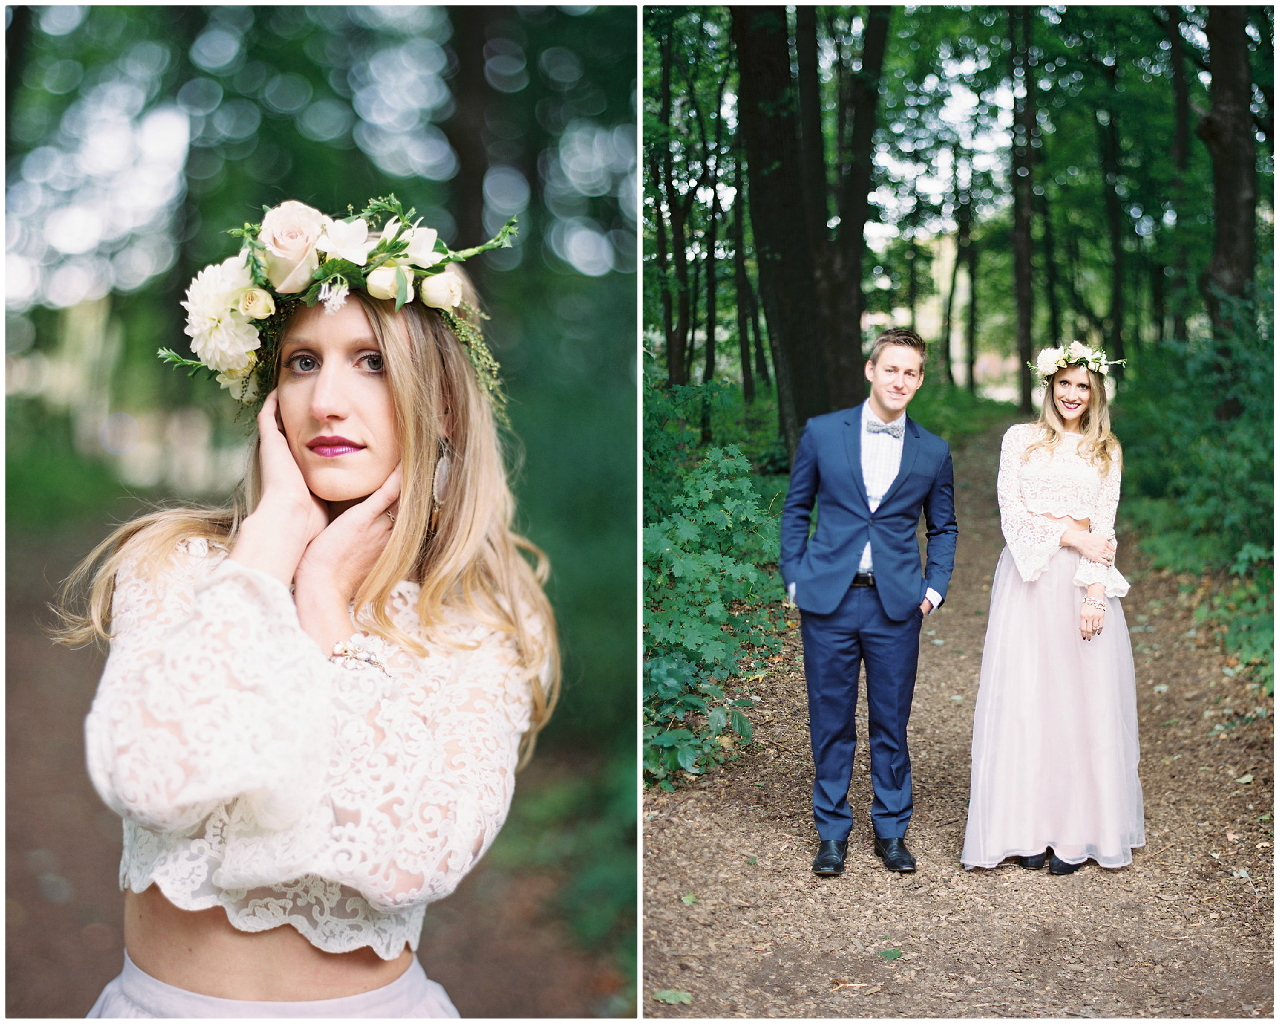 Boho Engagment Session | Flower Crown | The Day's Design | Ashley Slater Photography